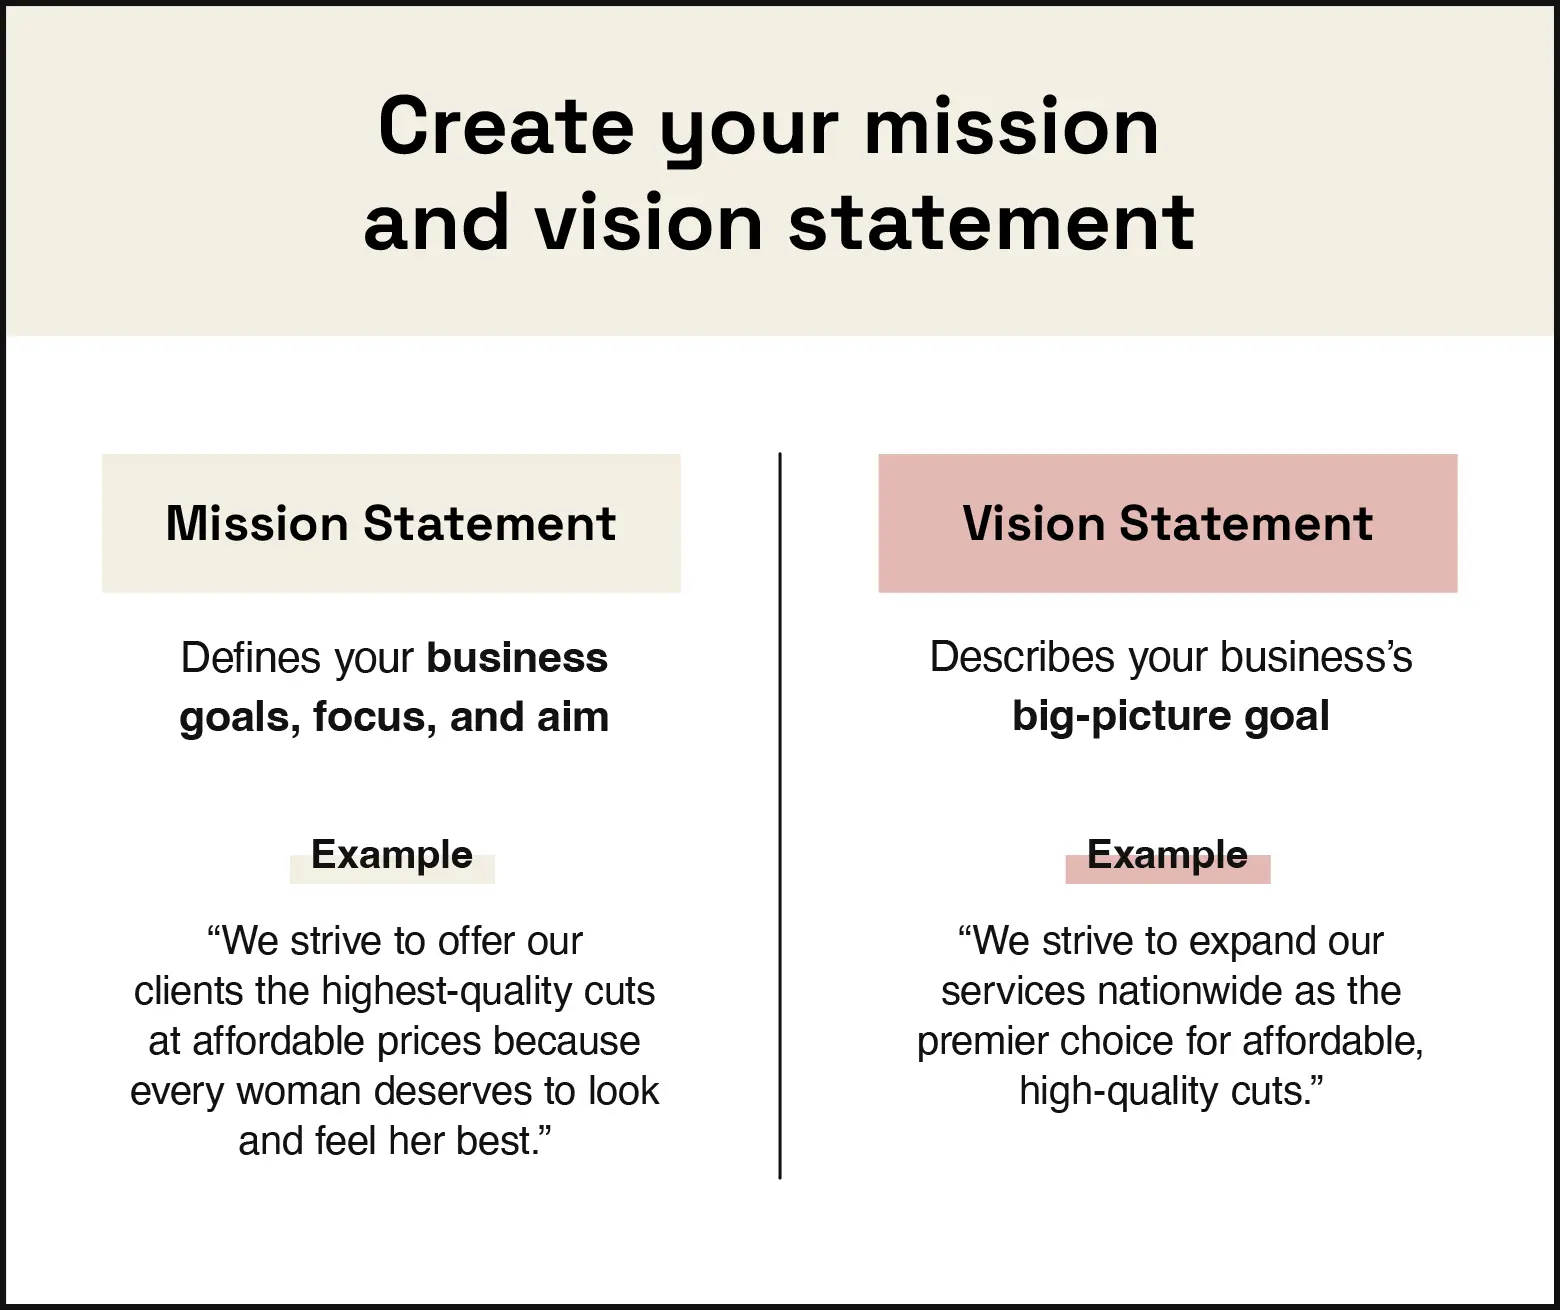 Image covers differences between mission statement and vision statement.